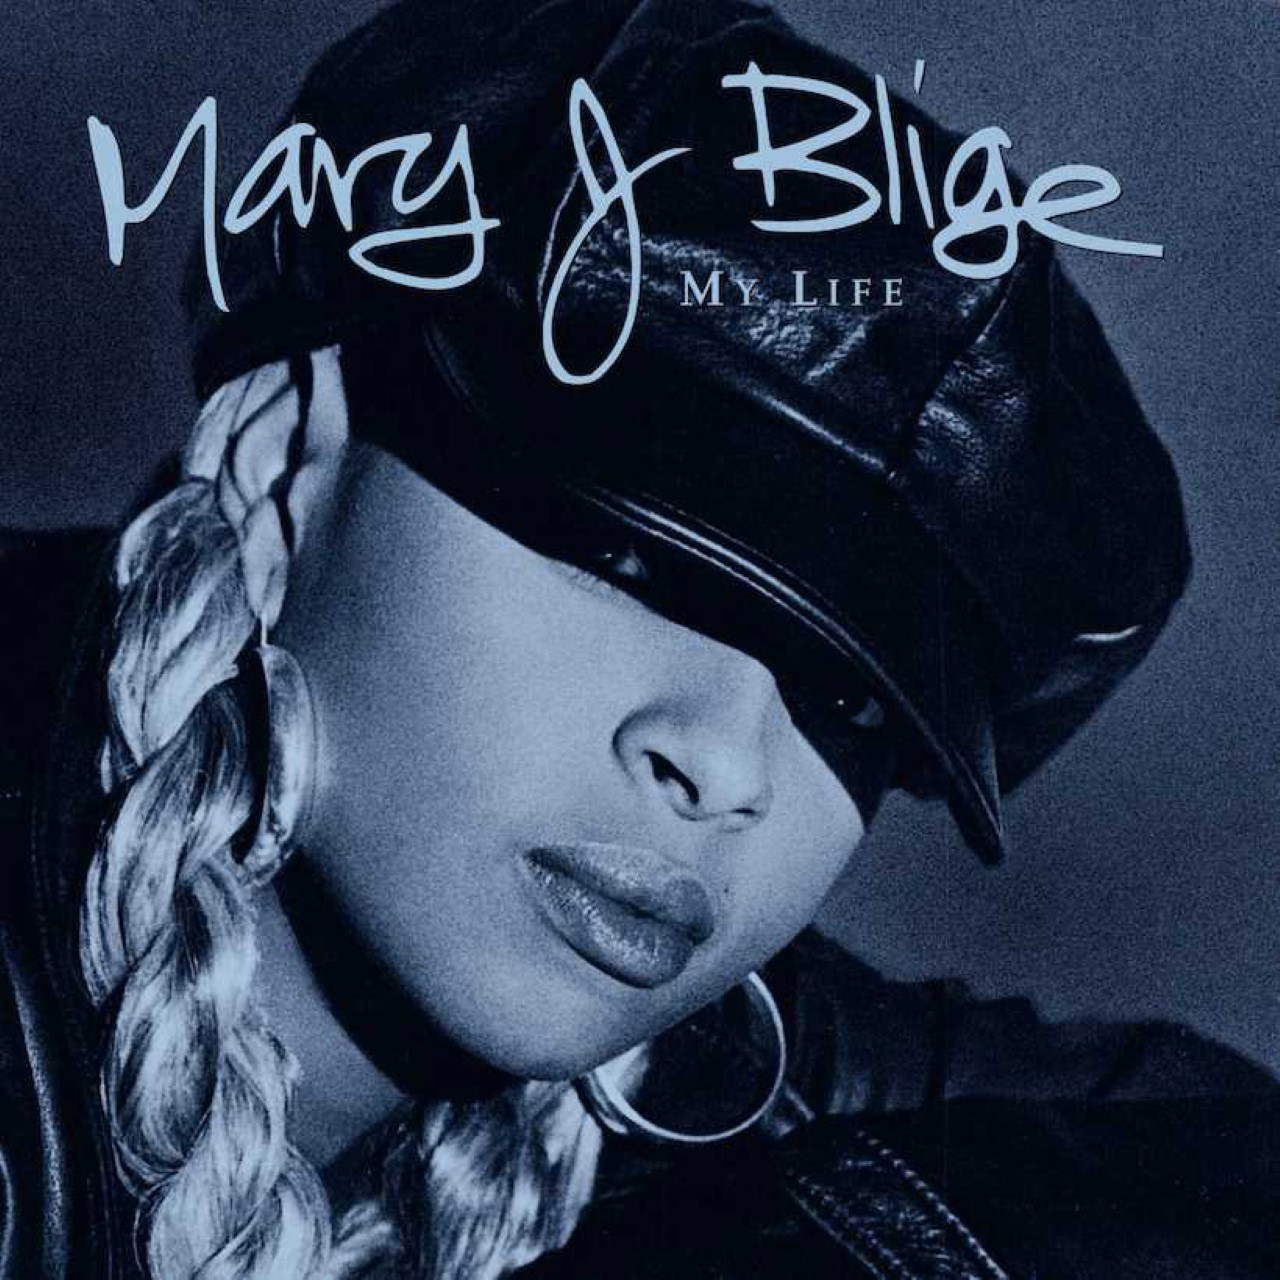 Art for My Life by Mary J. Blige